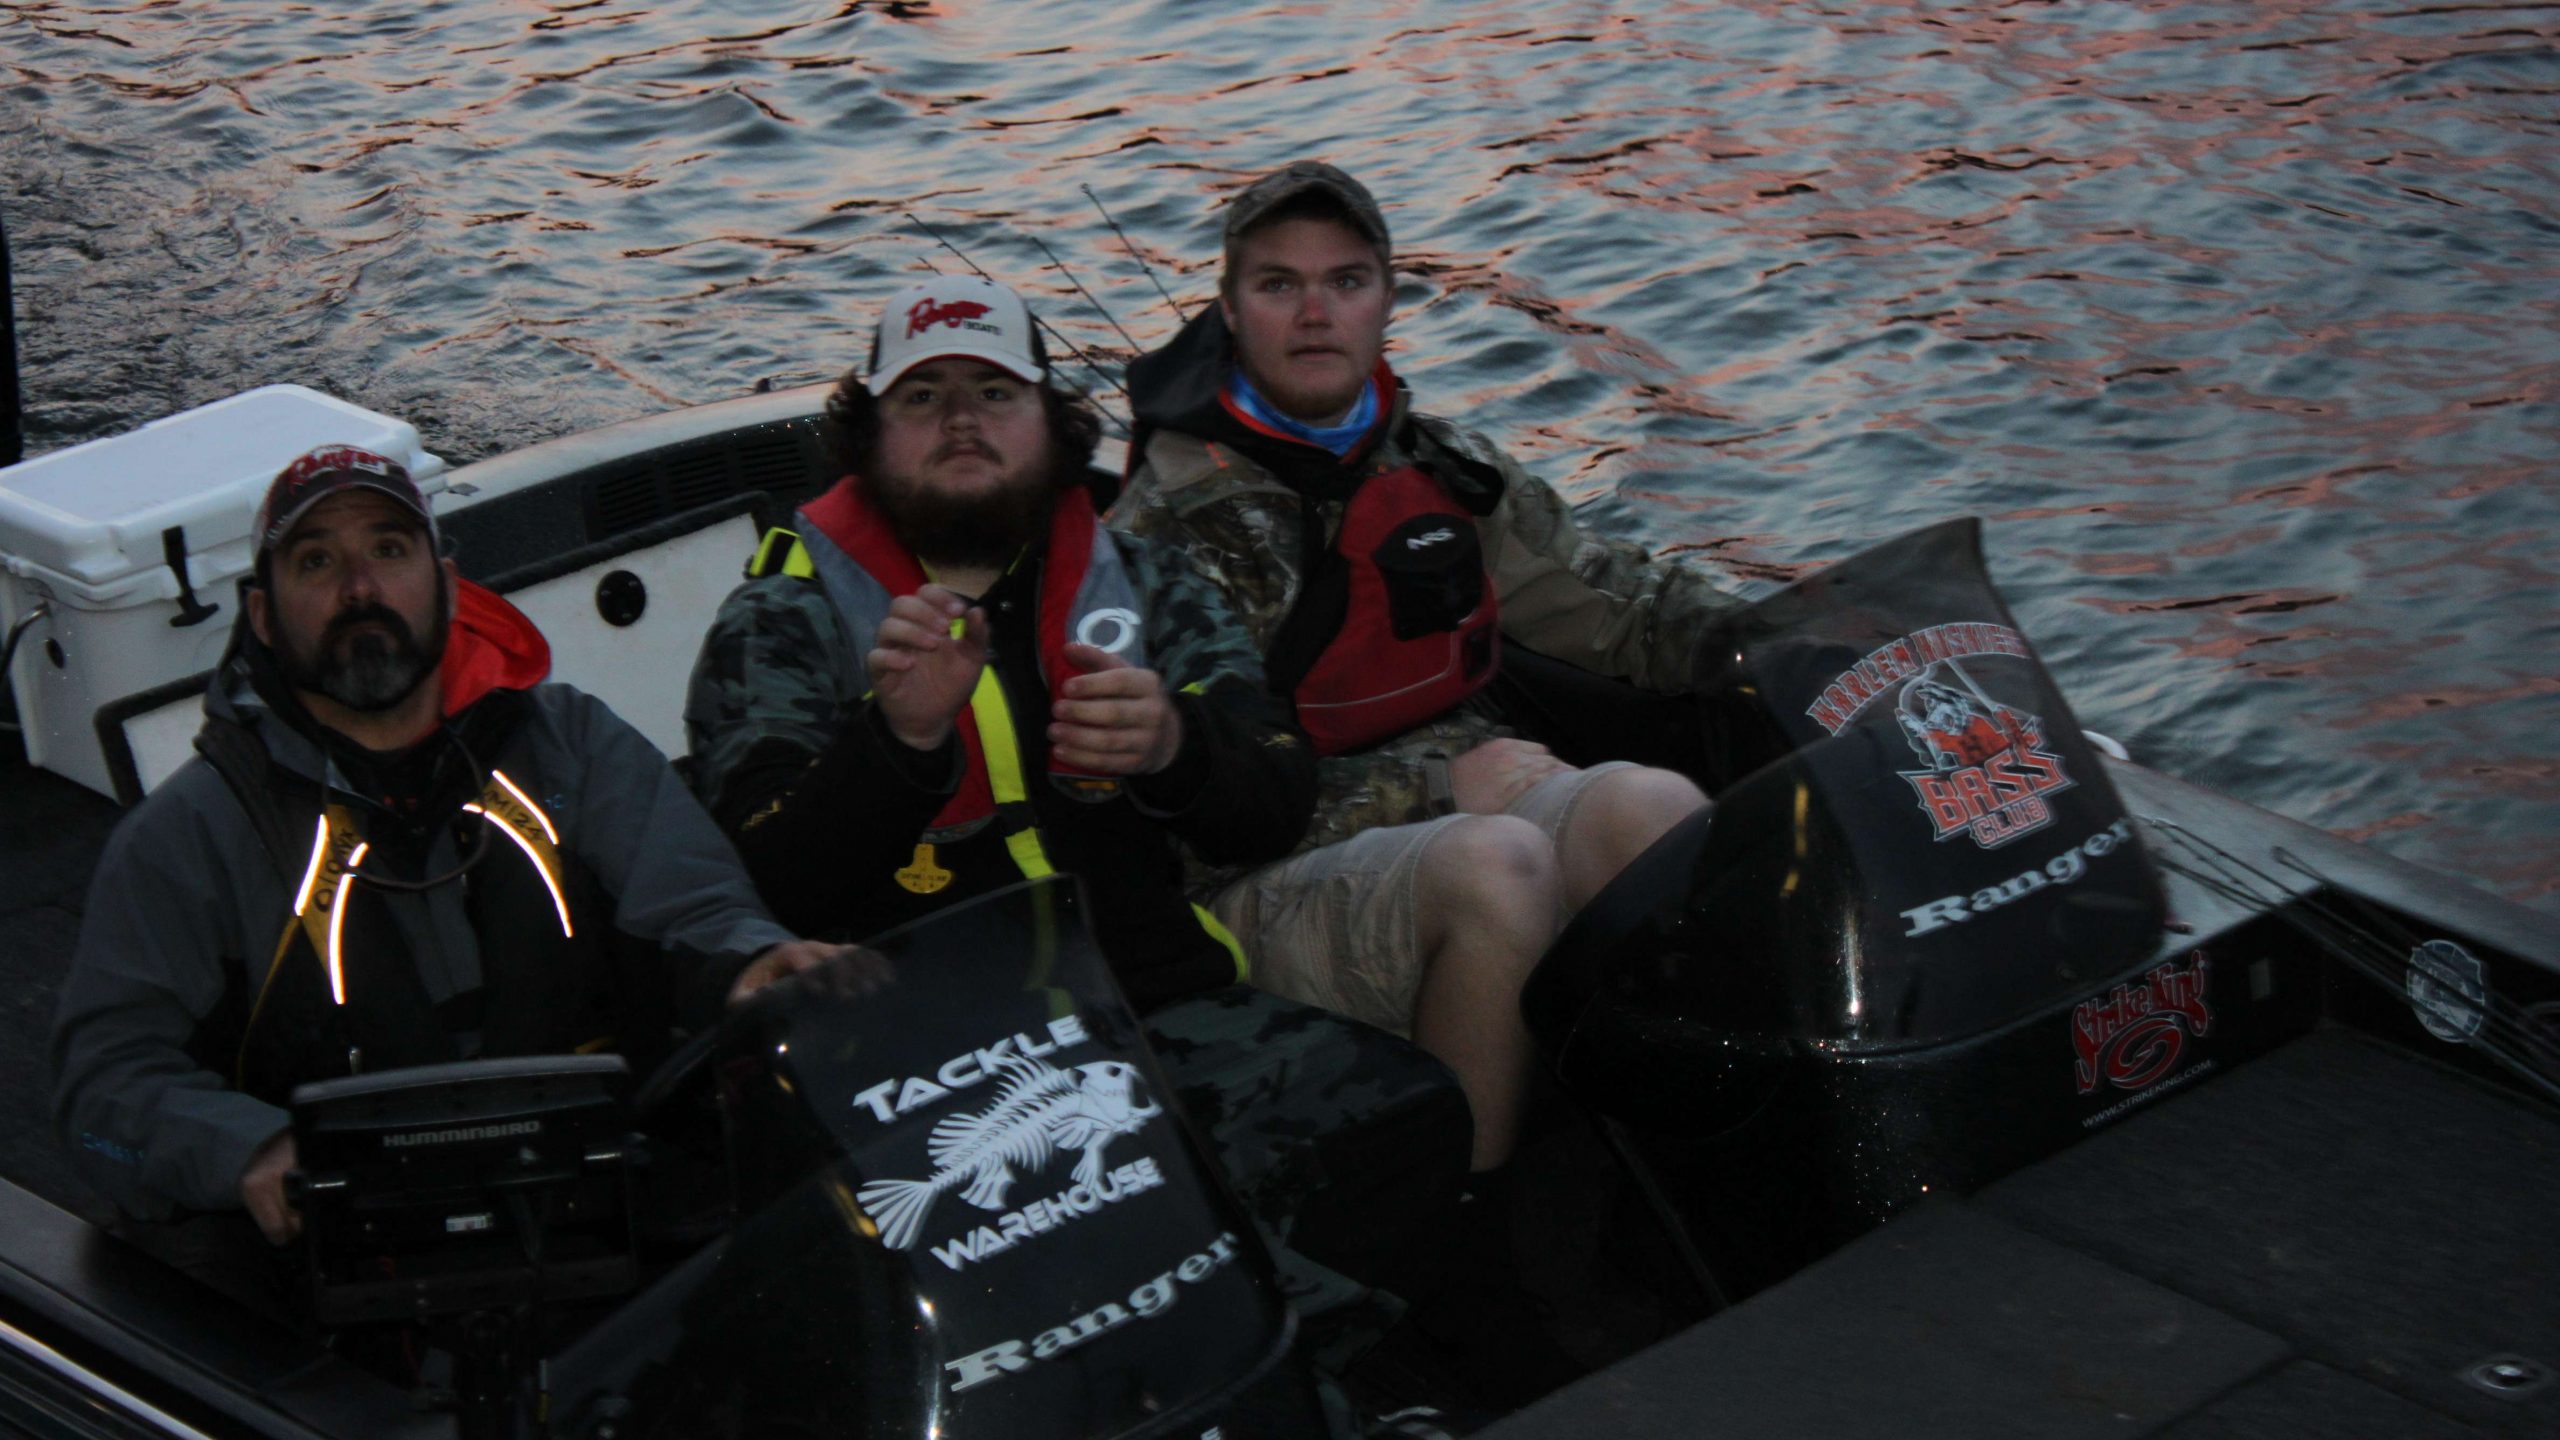 Illinois anglers Gage White and Jacob Bocker traveled a long
way to compete in this tournament.